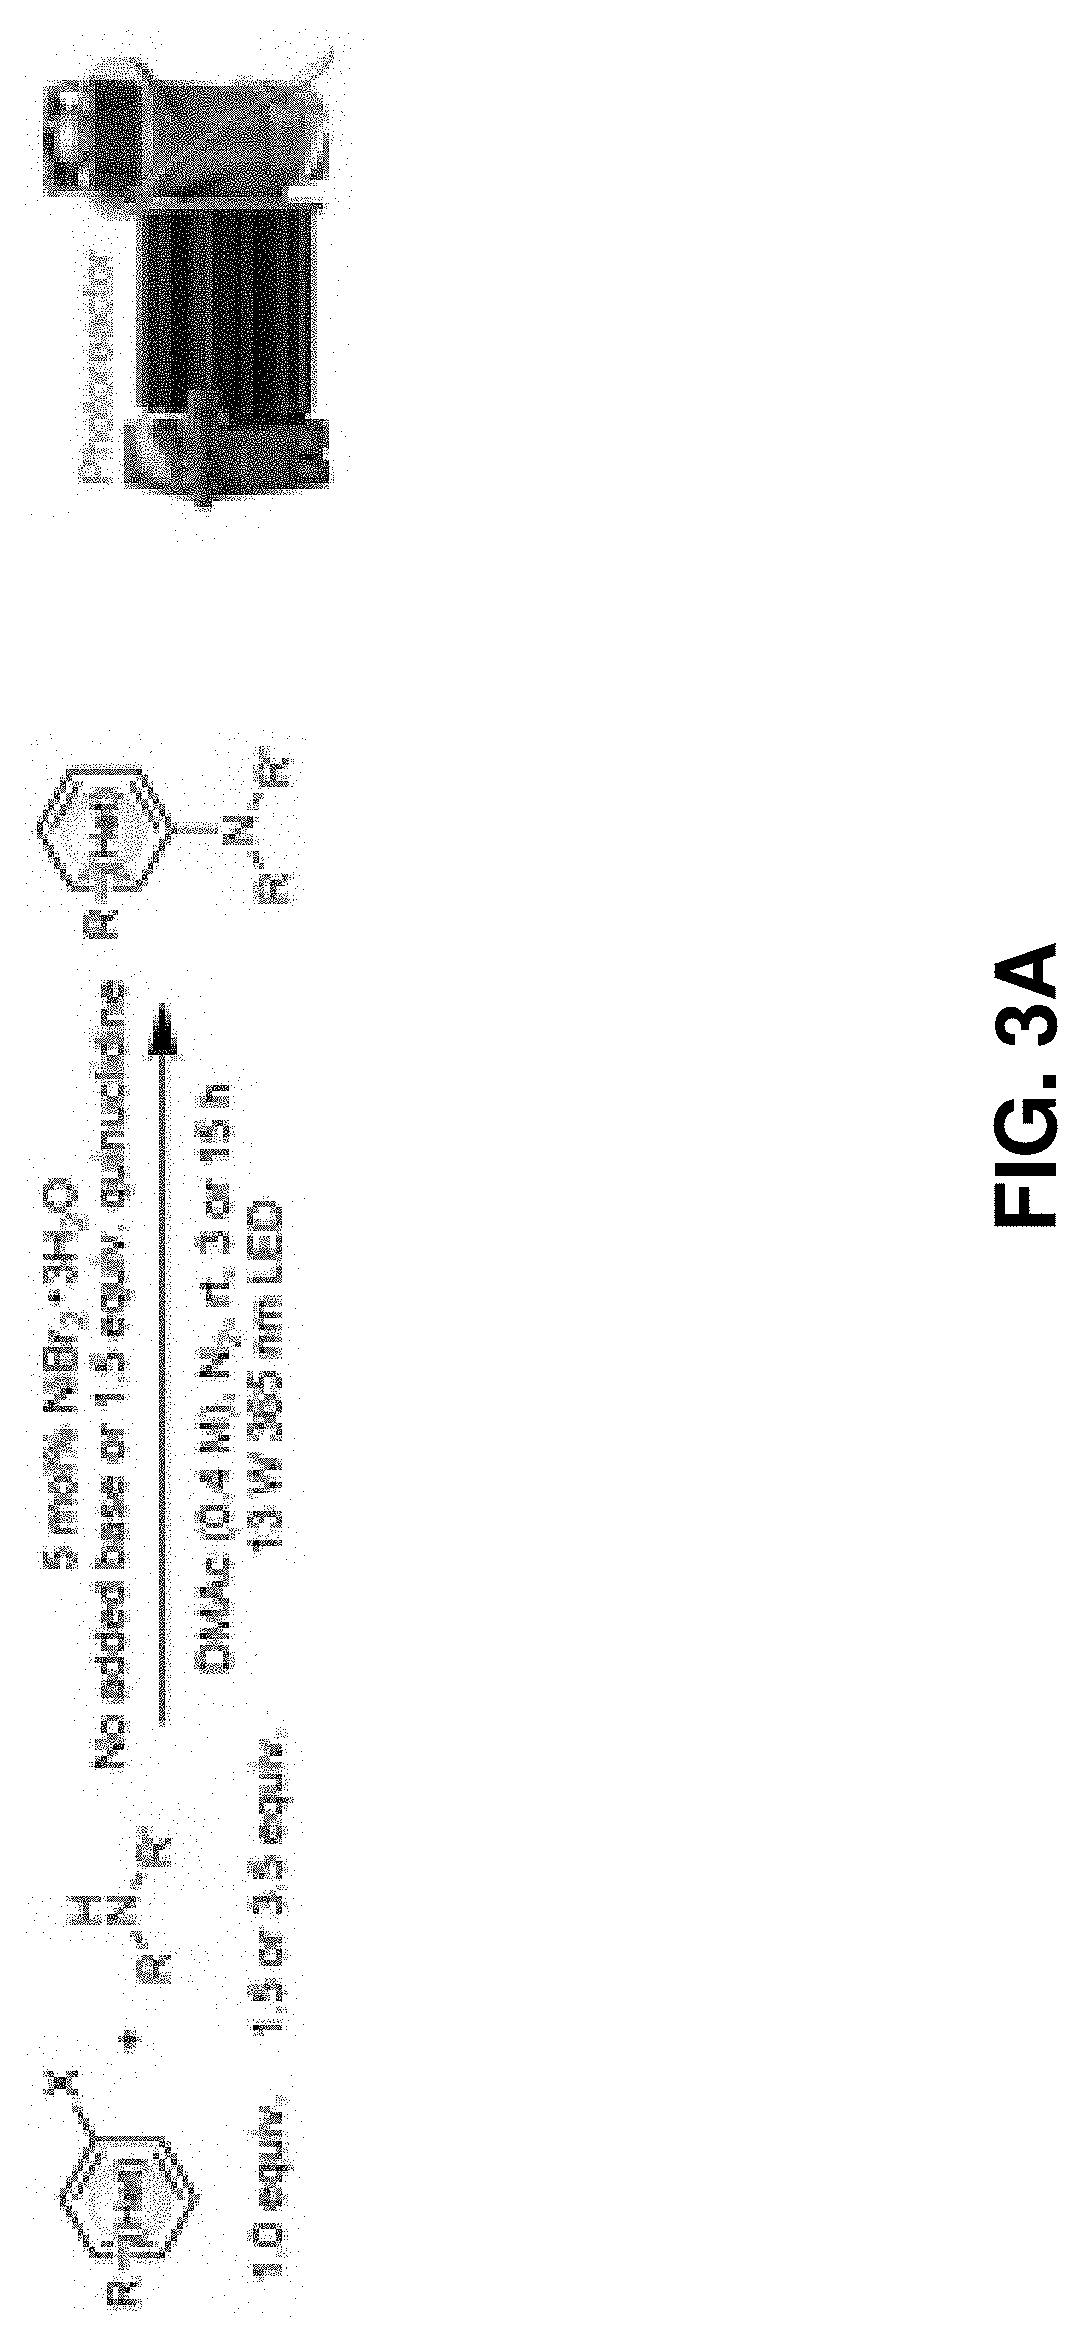 Methods for forming aryl carbon-nitrogen bonds using light and photoreactors useful for conducting such reactions